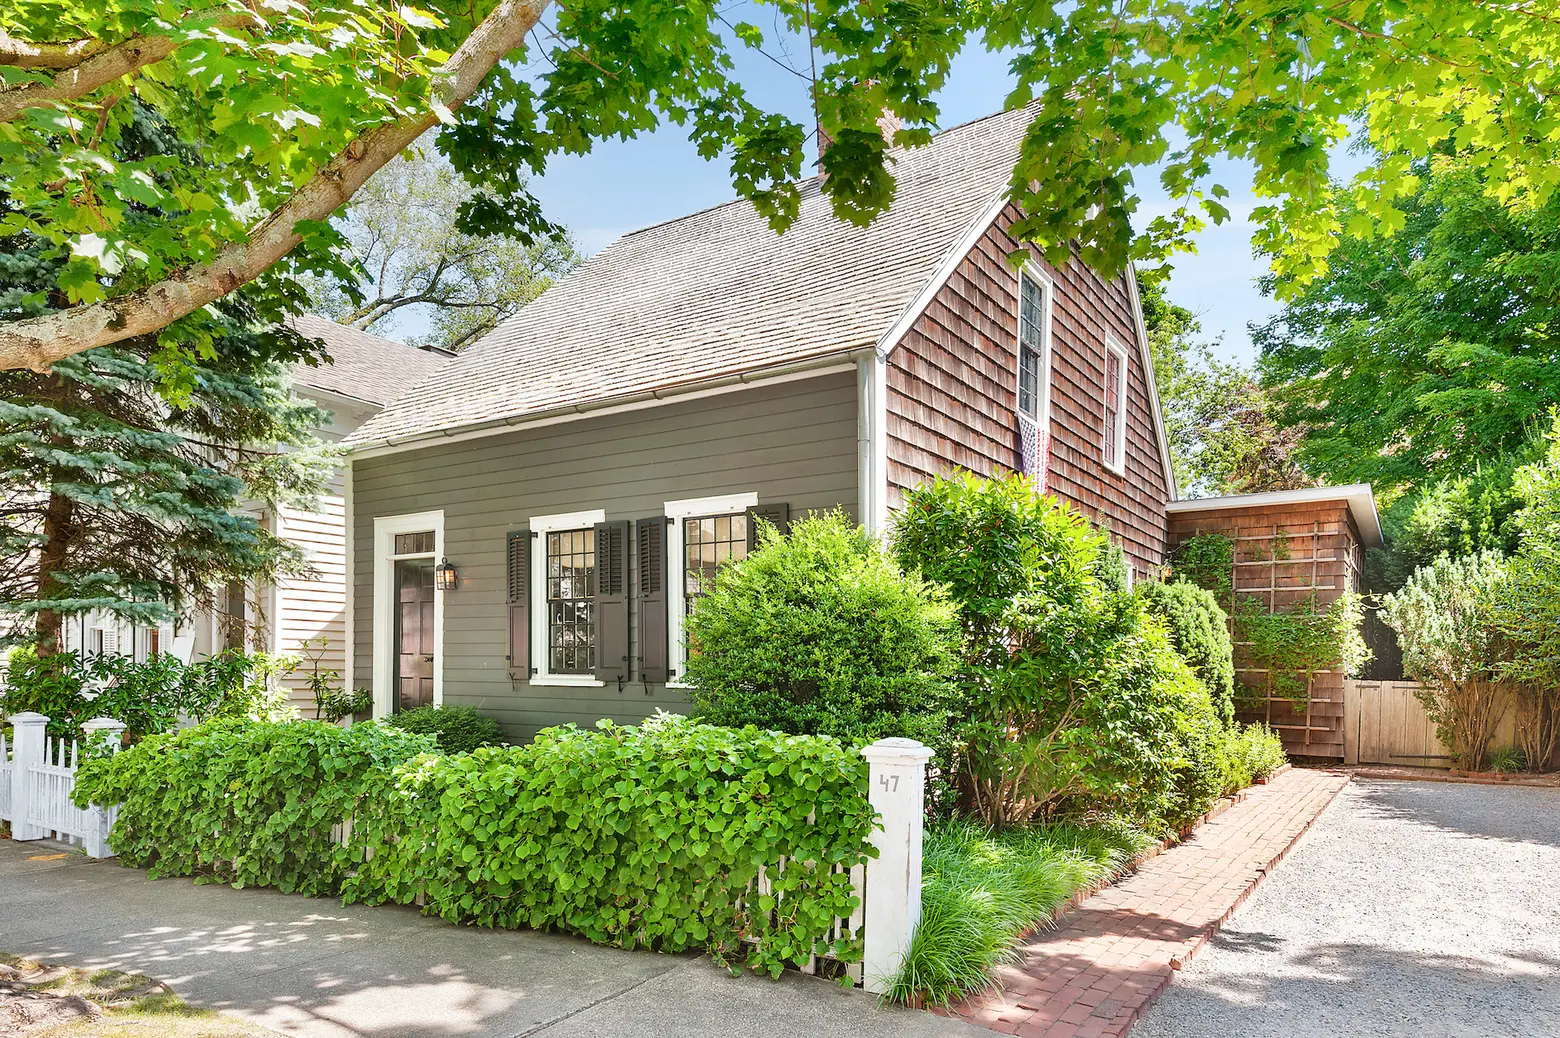 18th-century Sag Harbor home is a mix of history and whimsy for $3M